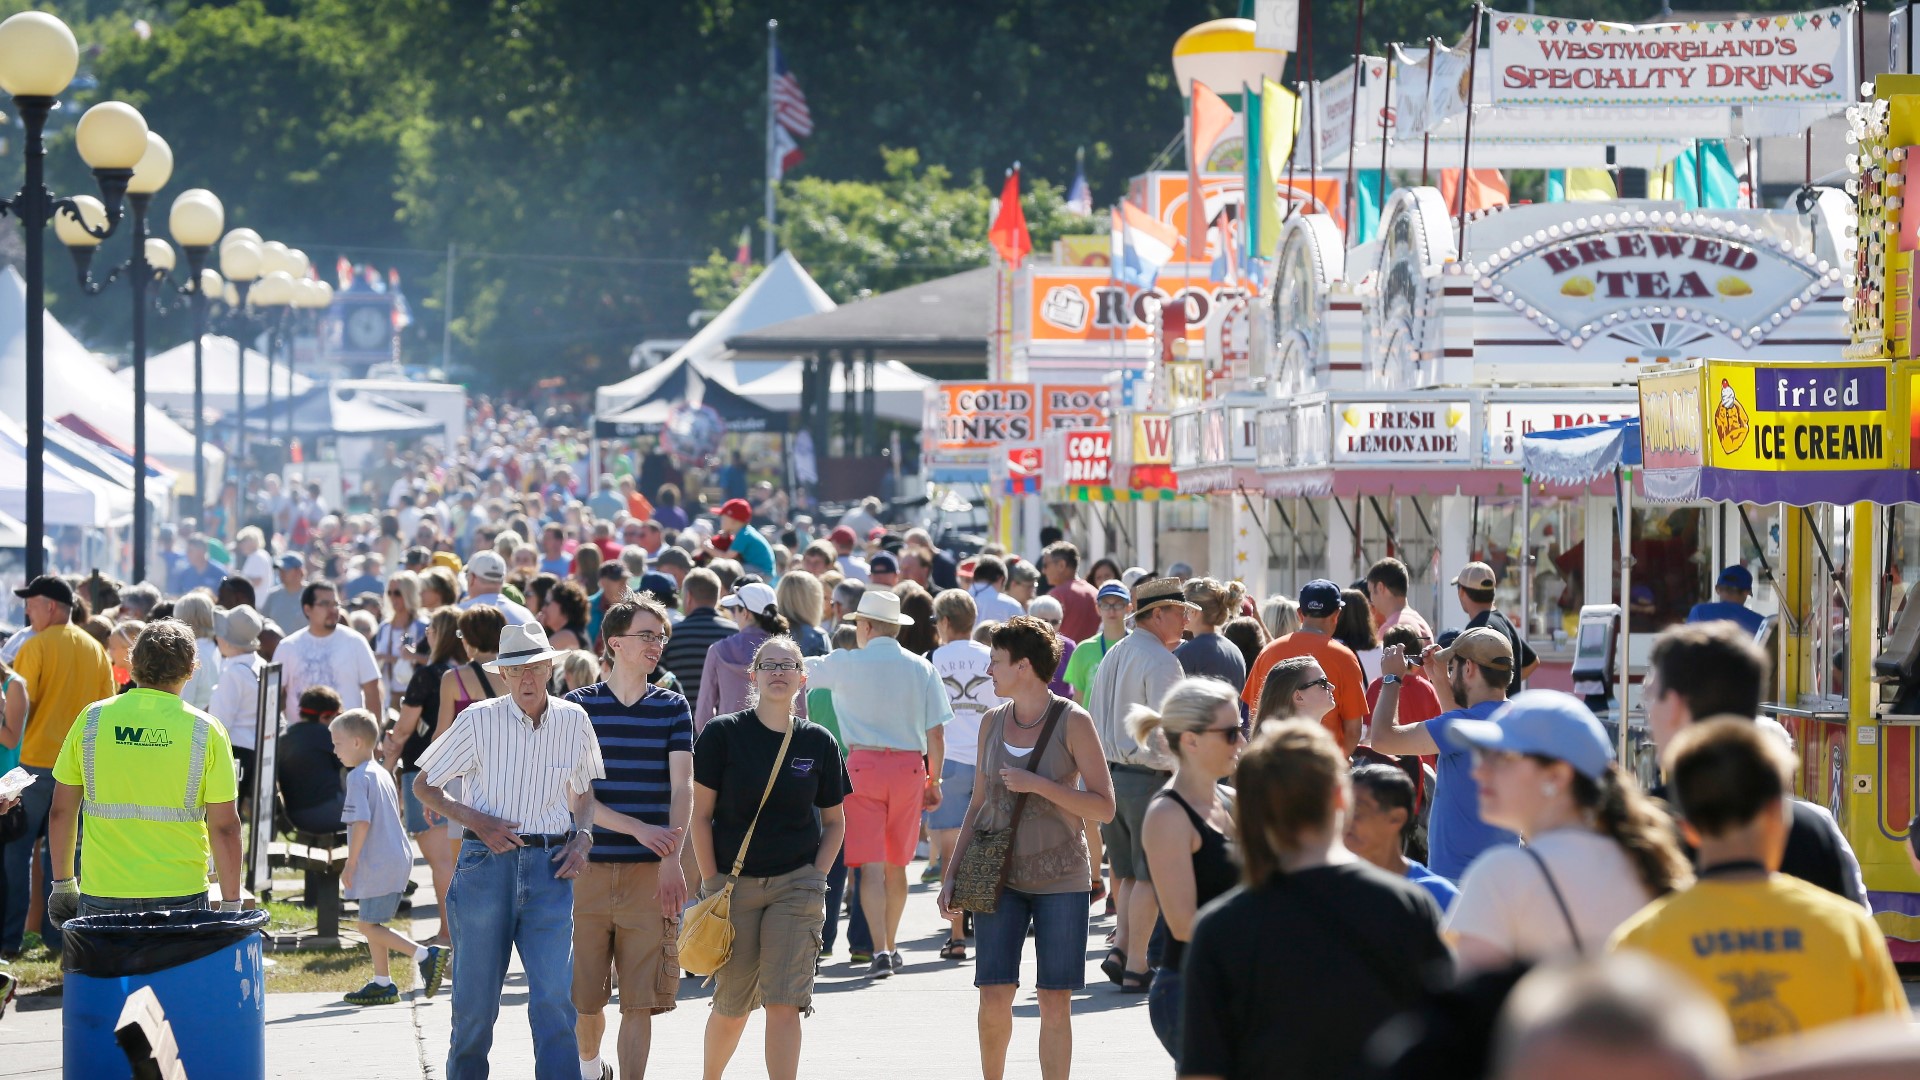 Believe it or not, the high temperature has only reach 100° or above during one Iowa State Fair in recorded history.